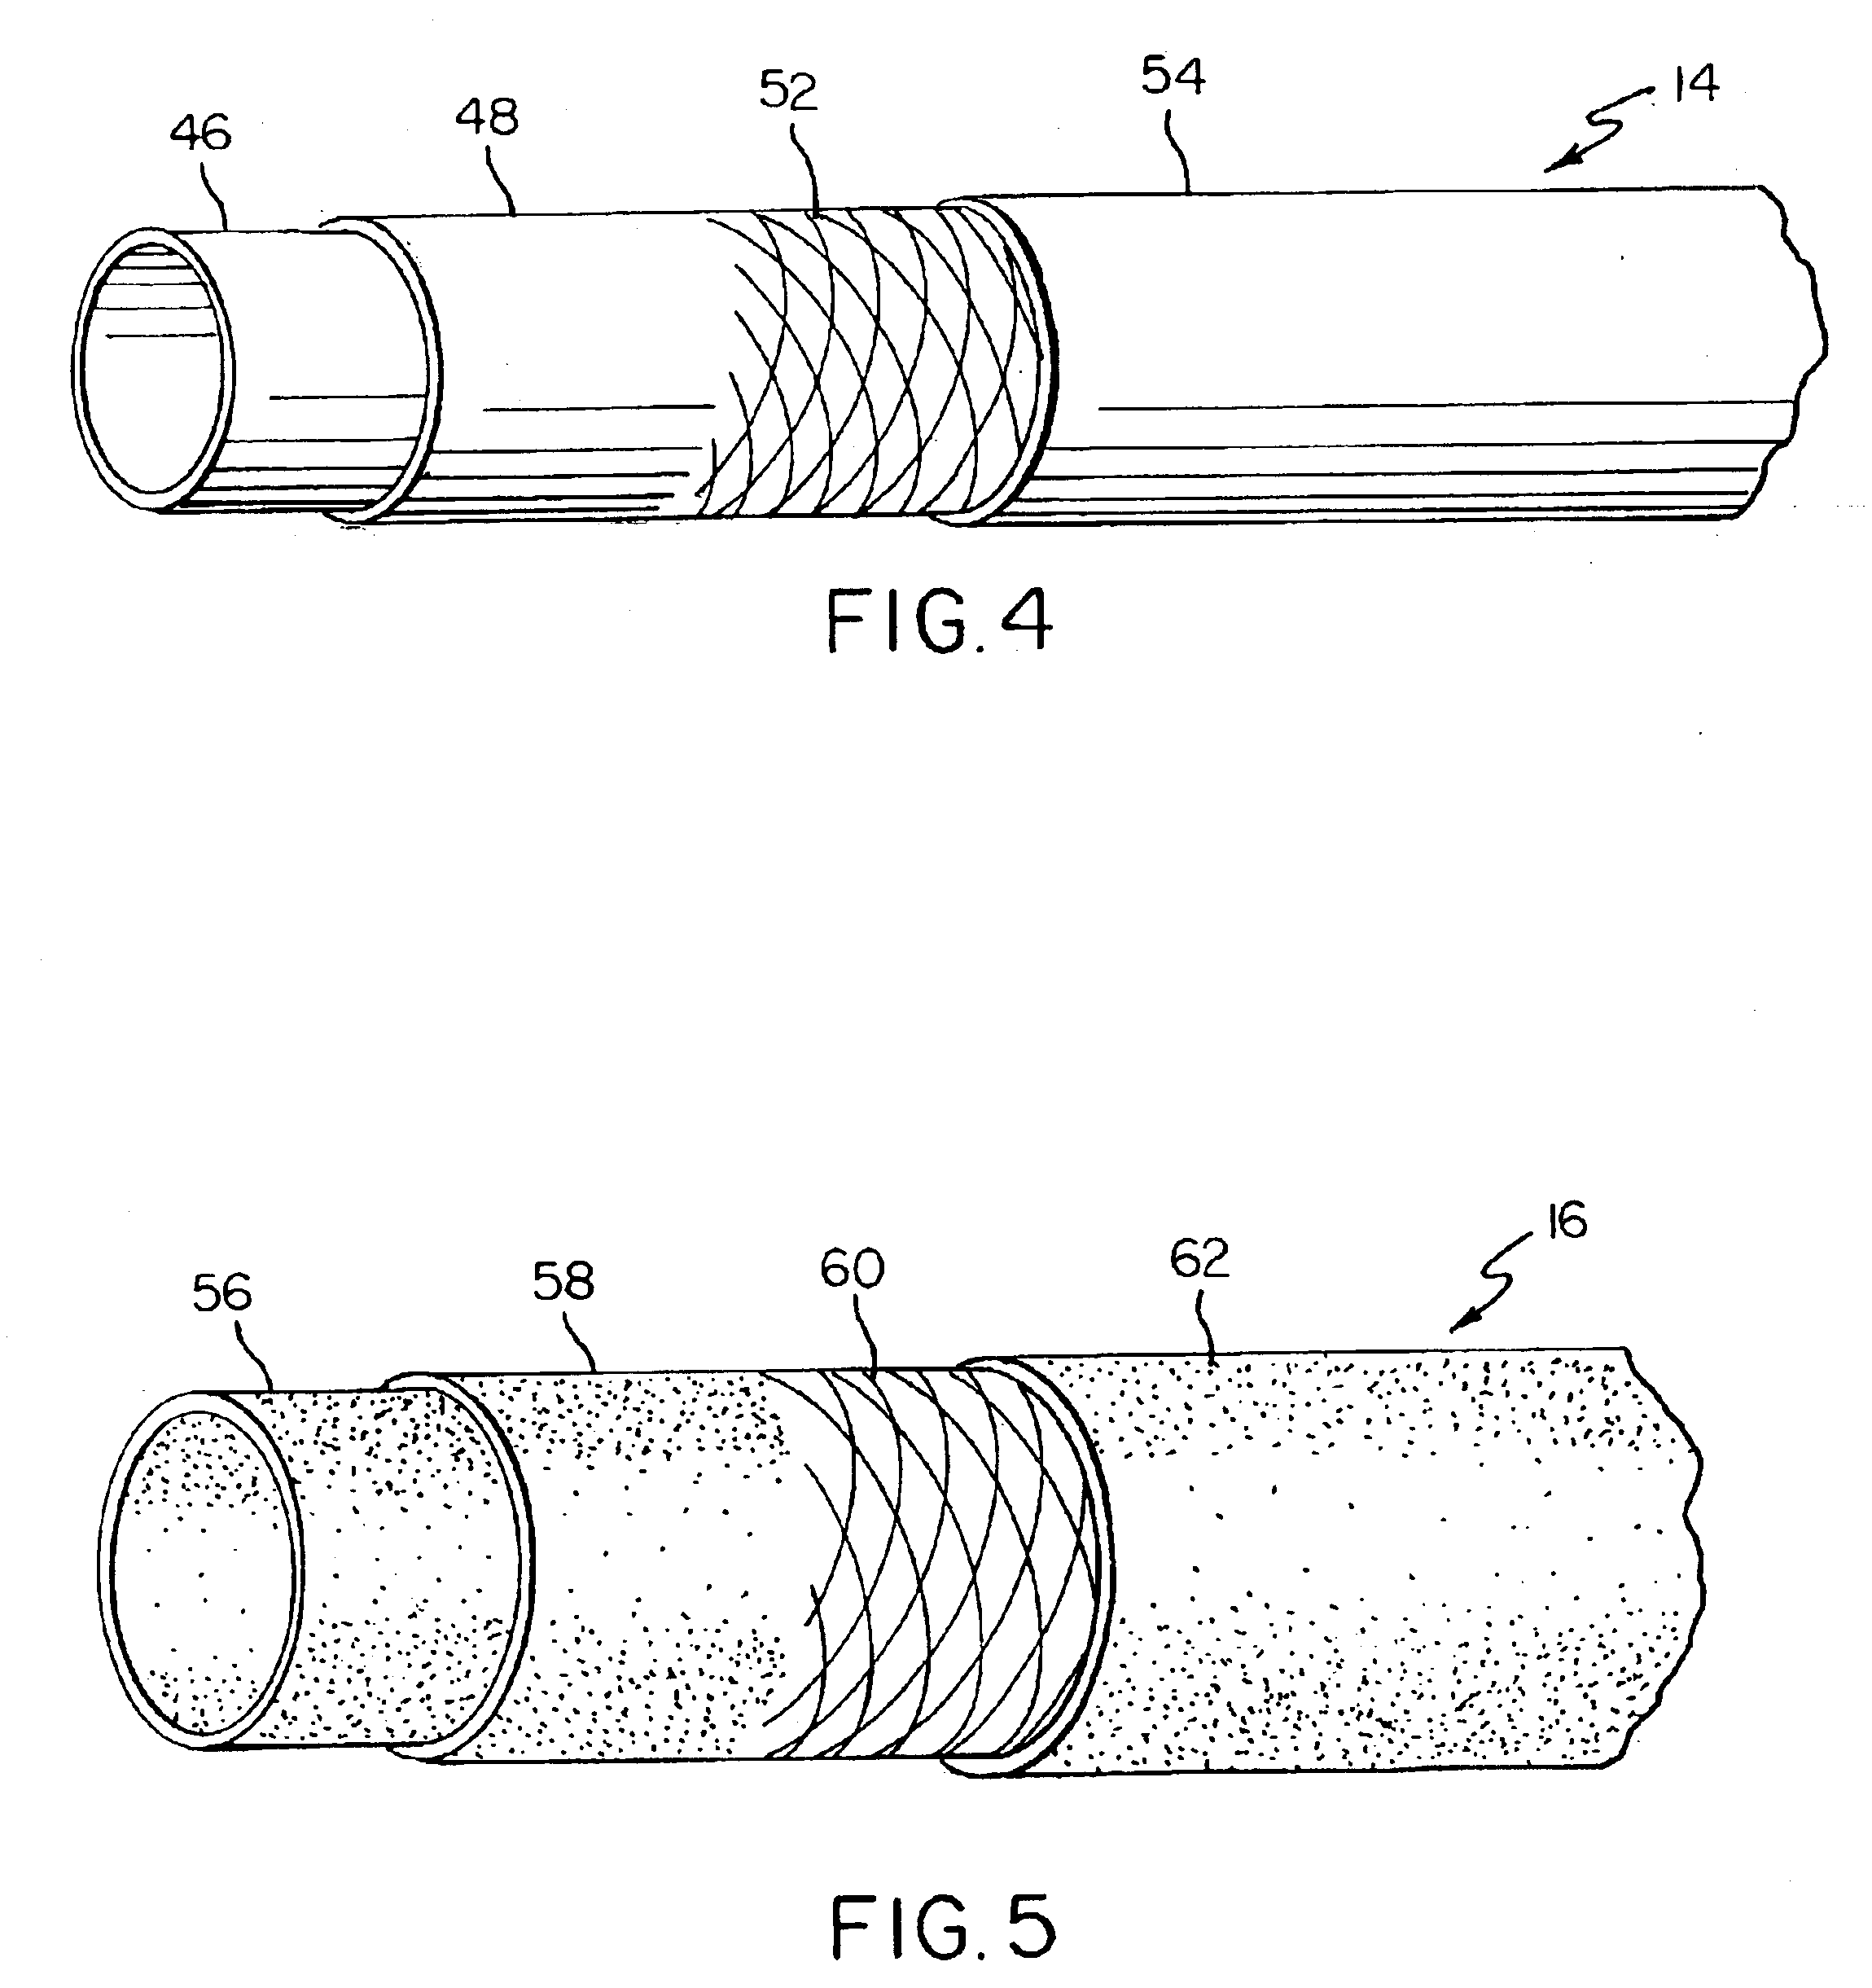 Conductive tubular insert for a fuel transport system, and method